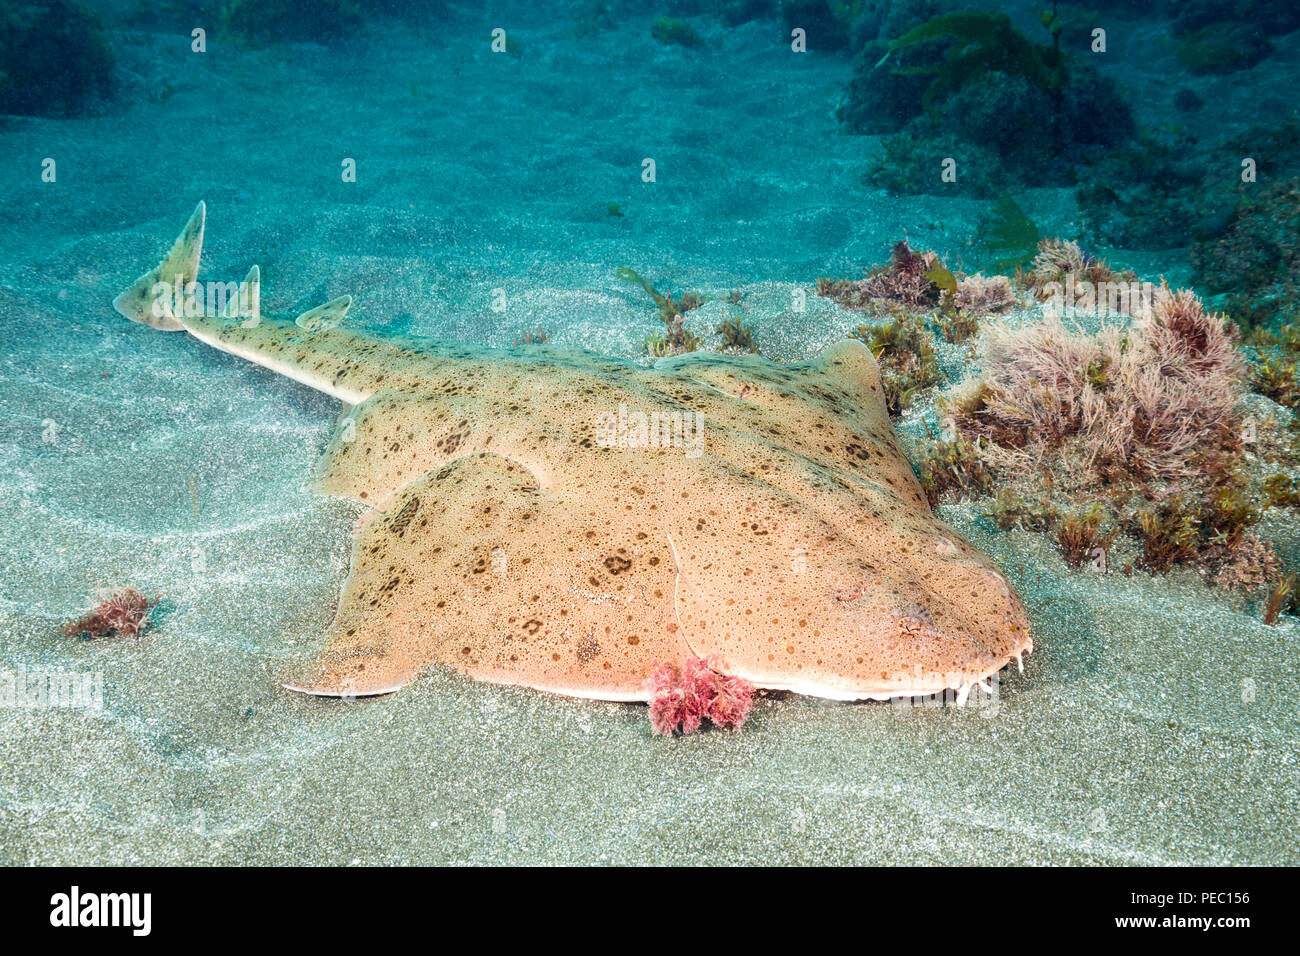 The Pacific angel shark, Squatina californica, with it’s flat body and huge, wing-like pectoral fins looks somewhat more like a ray than a shark. It’s Stock Photo